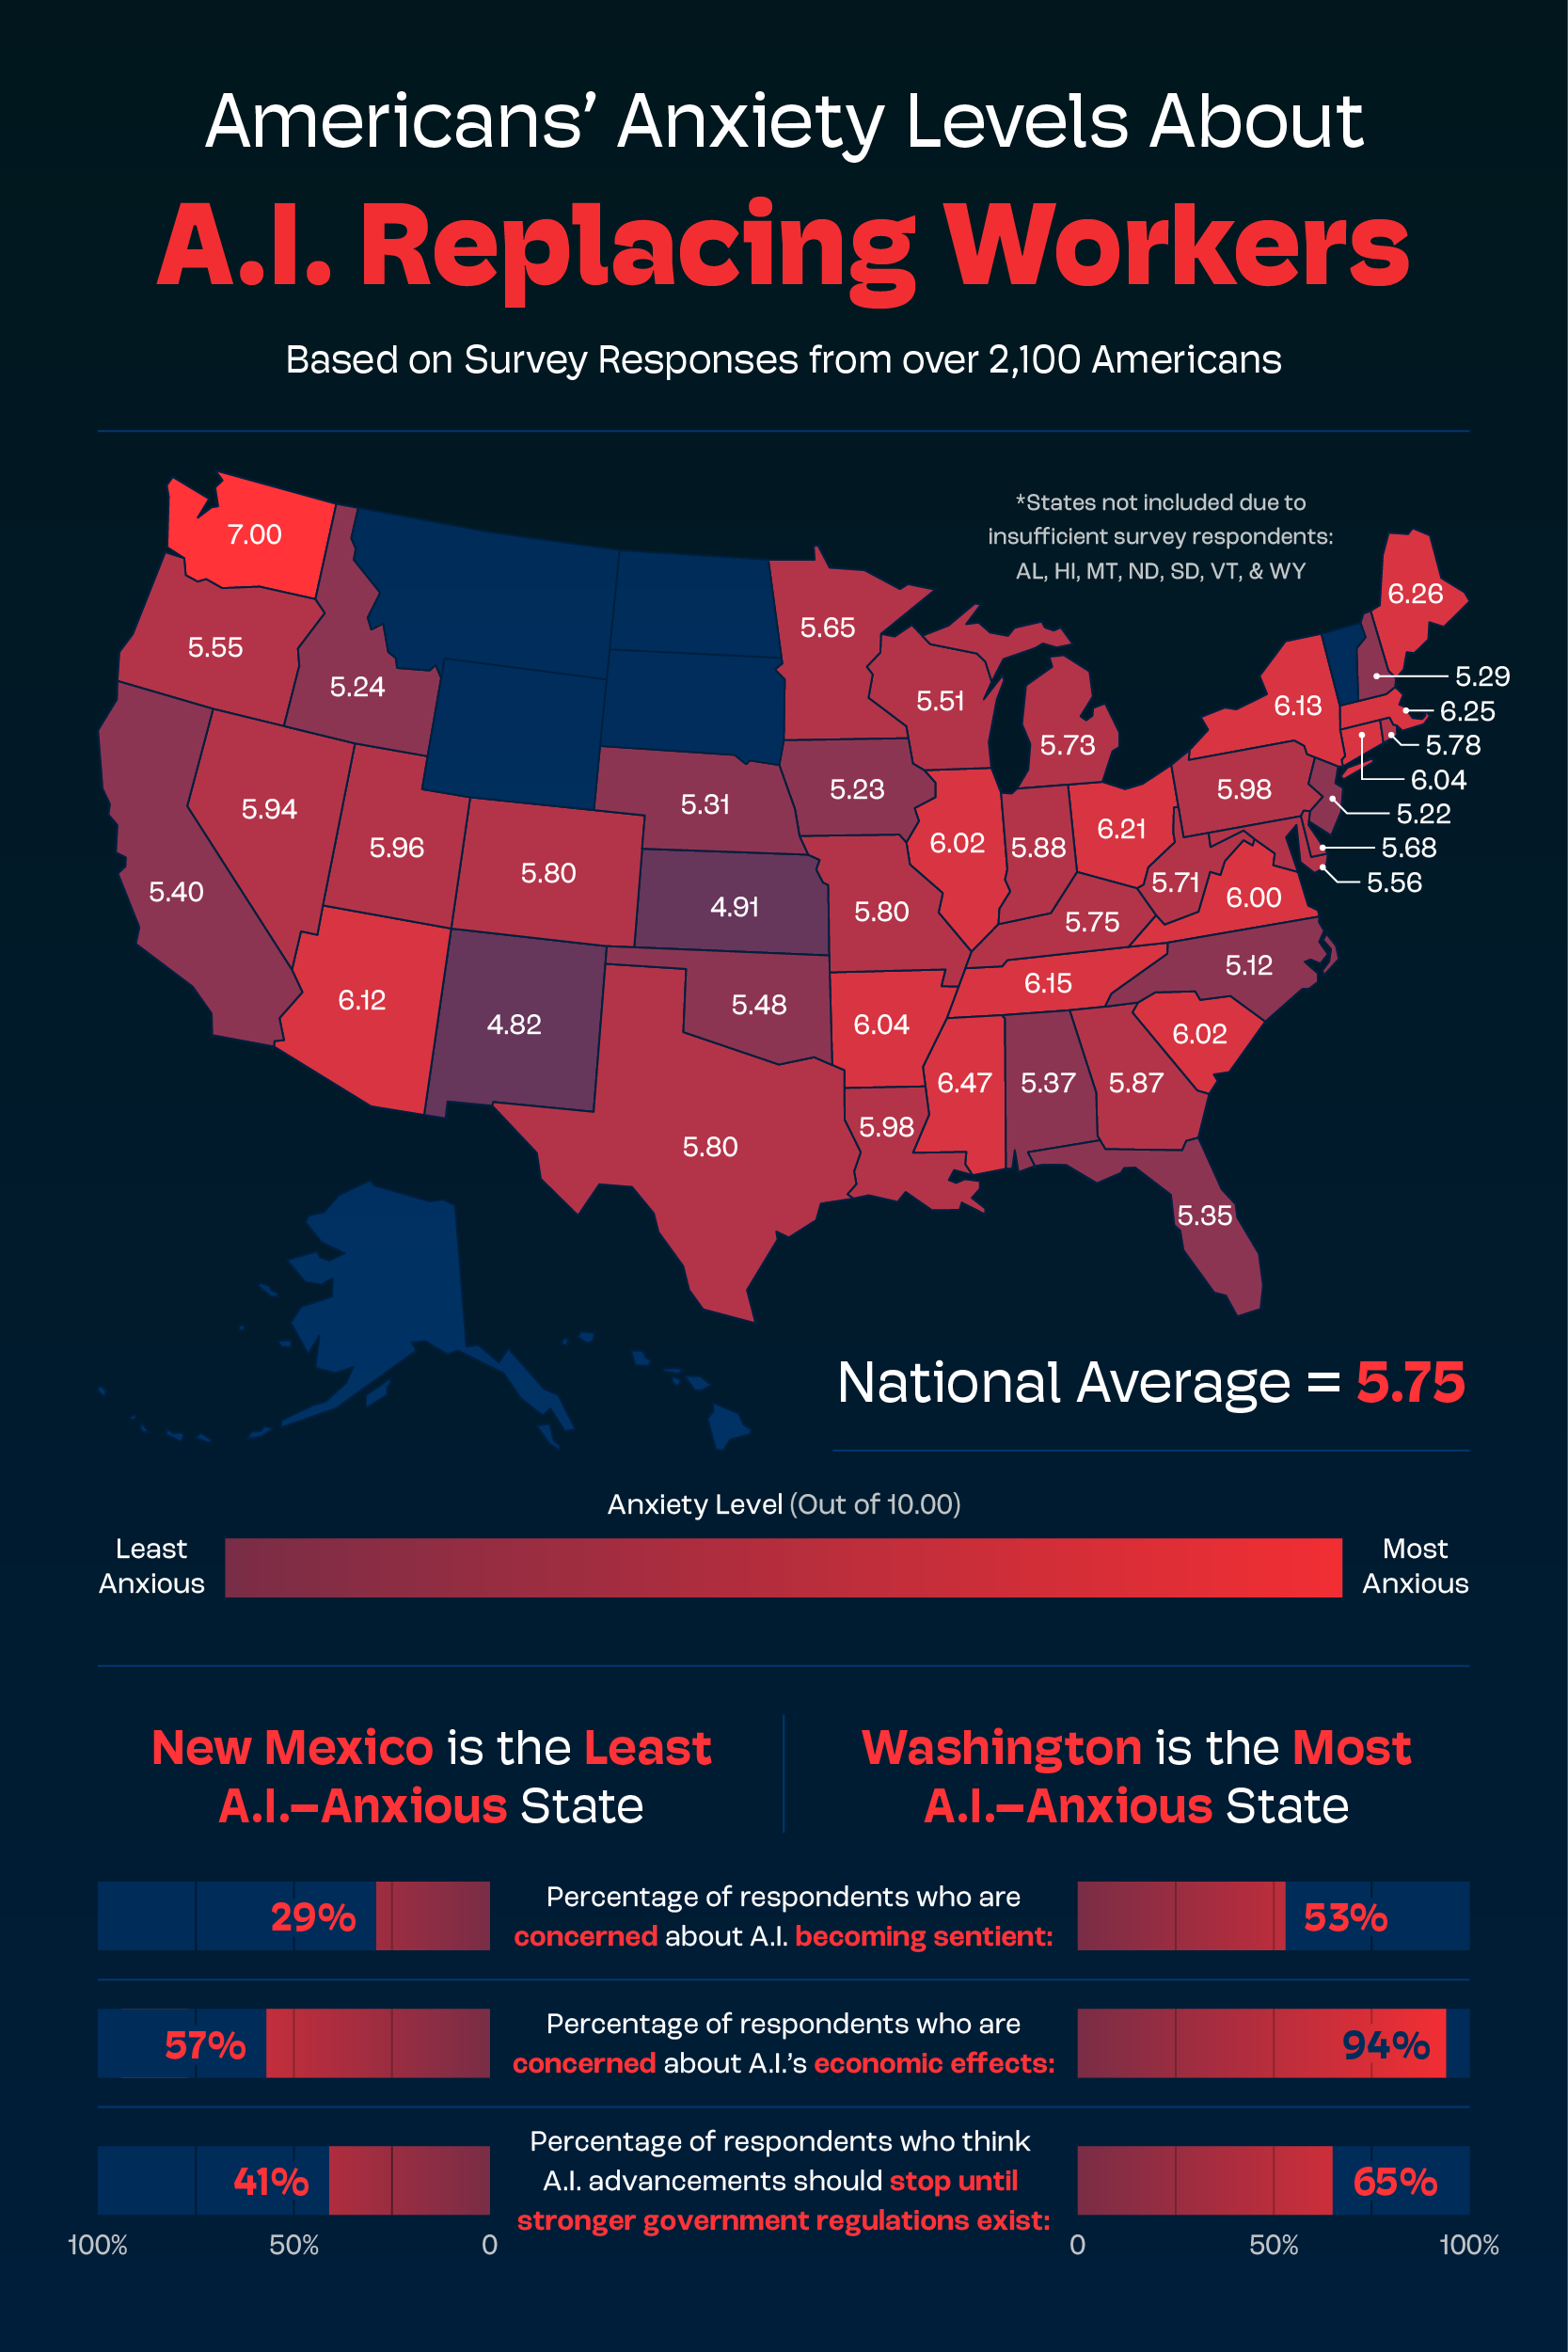 A U.S. map showing the states where anxiety levels about AI taking jobs are the highest and lowest.